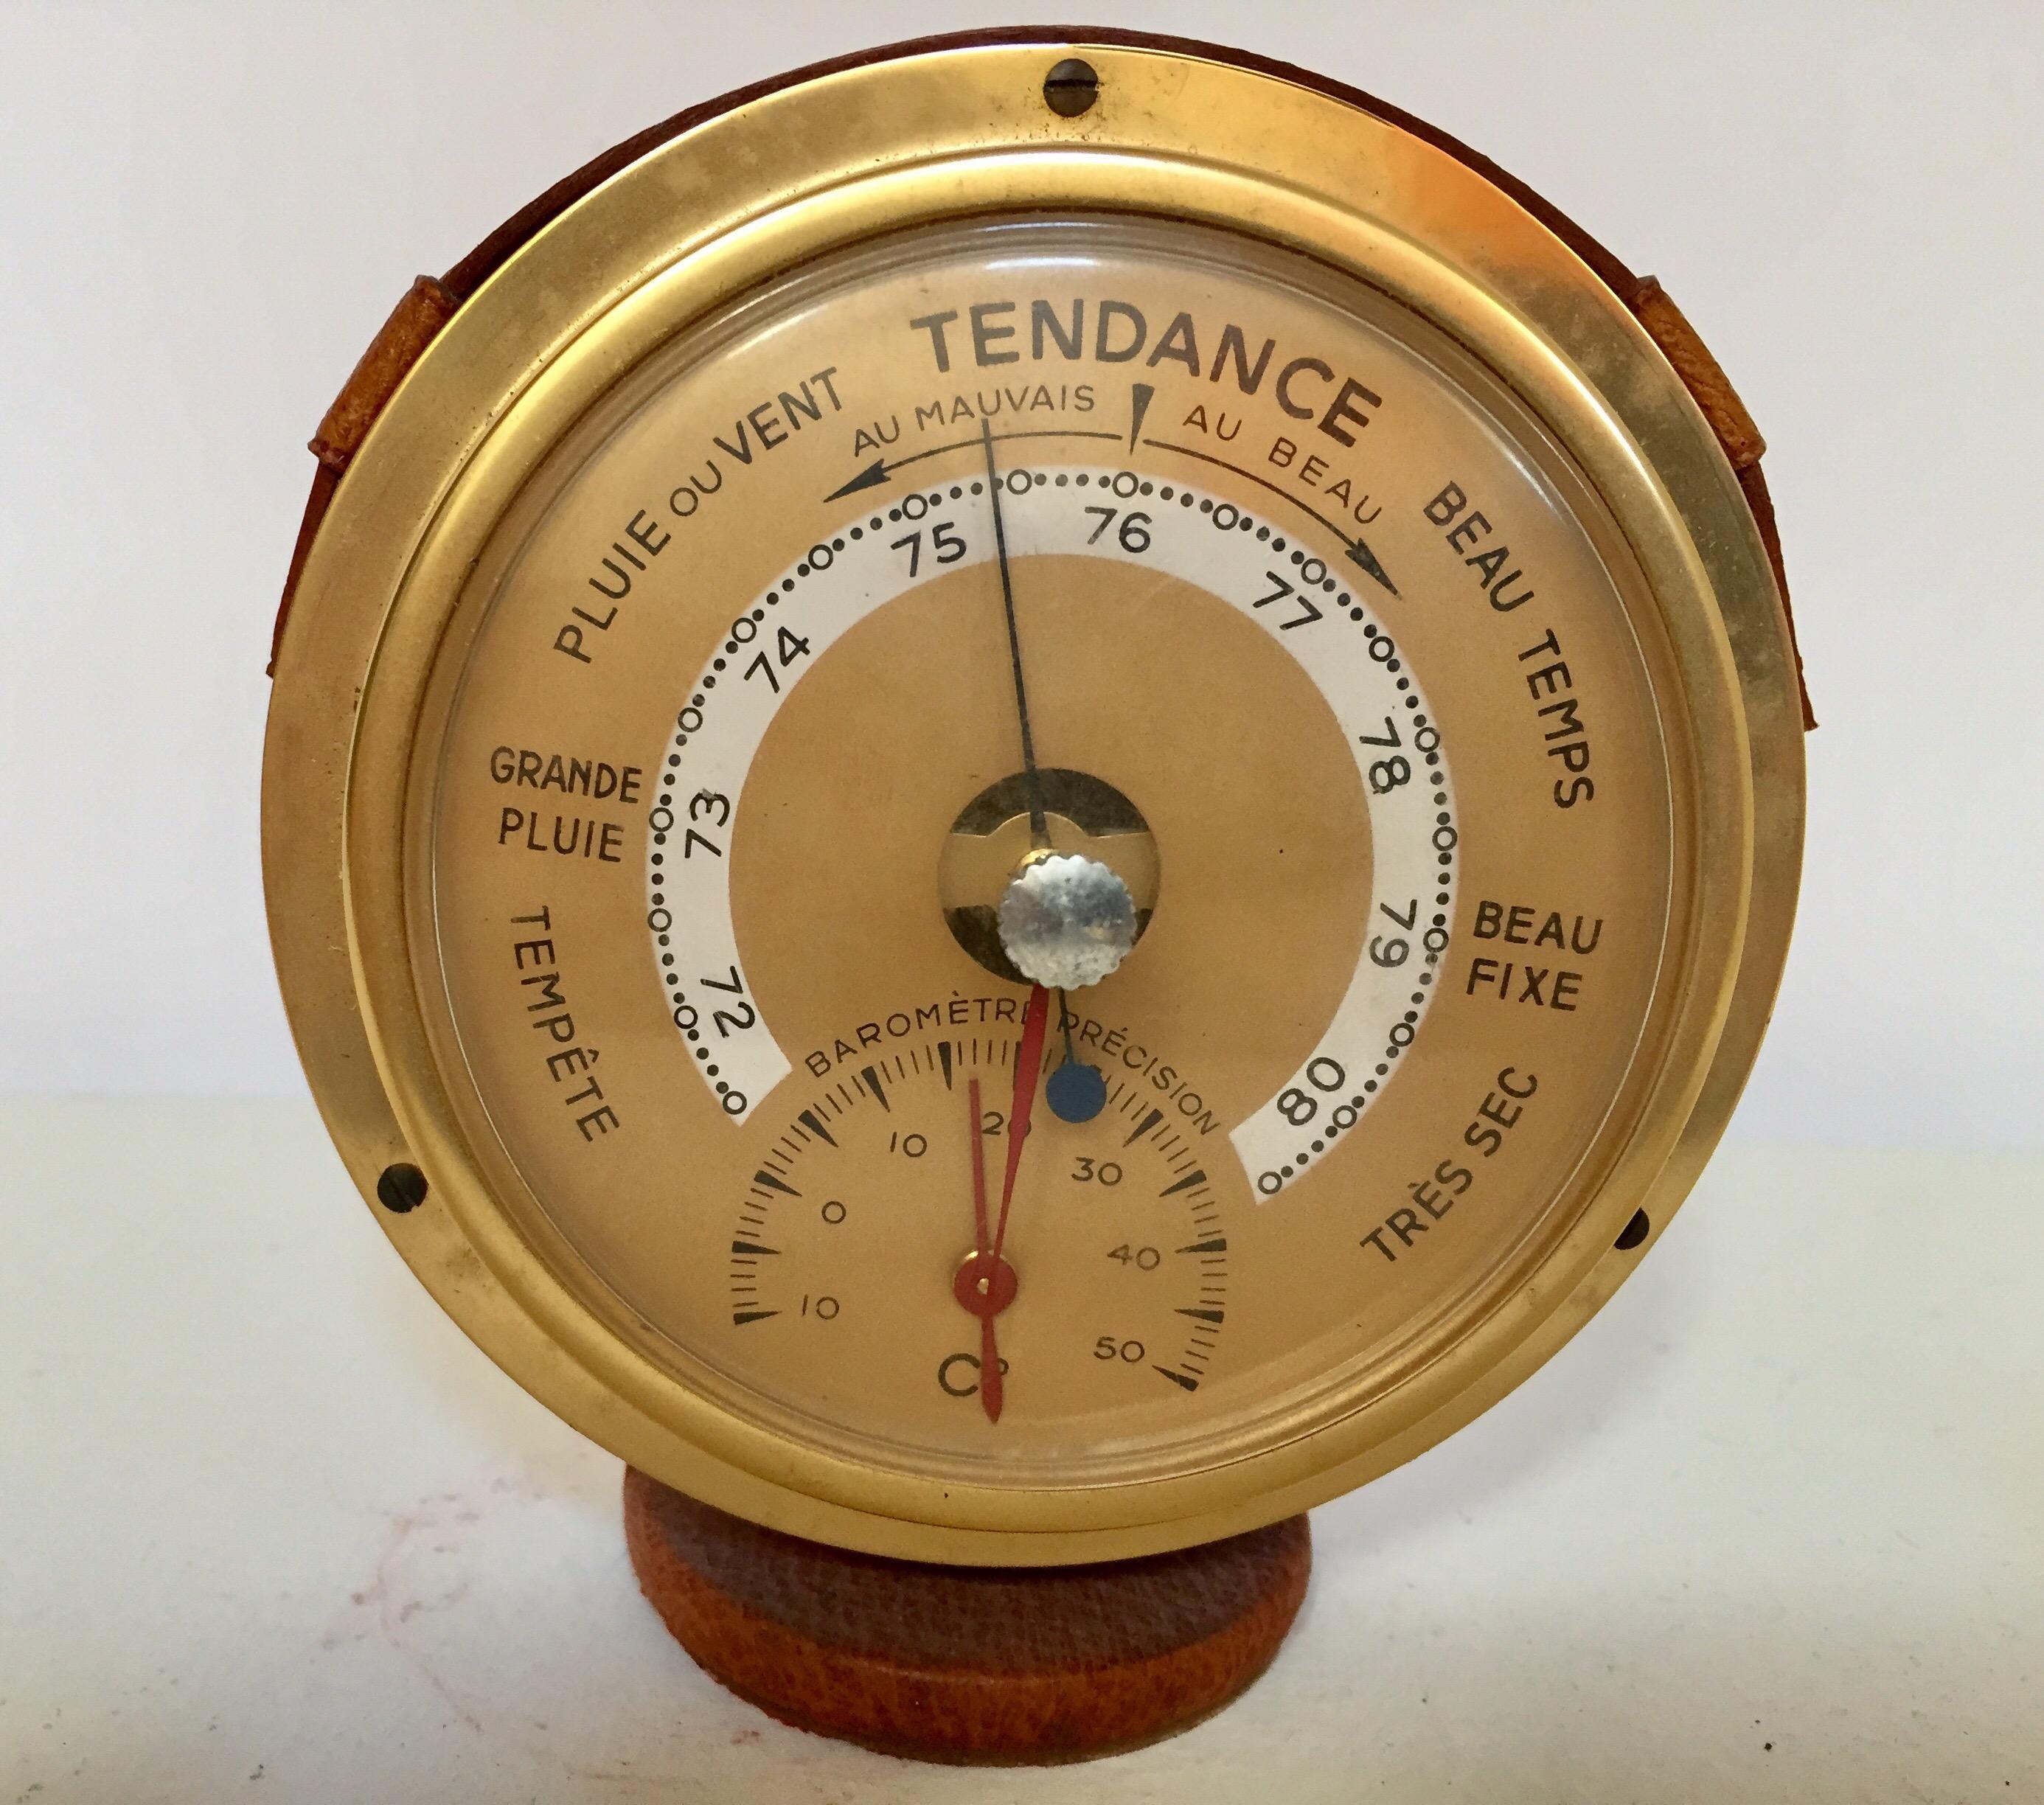 Hand-Crafted Brass German Barometer with Readings in French Wrapped in Leather, Adnet Style